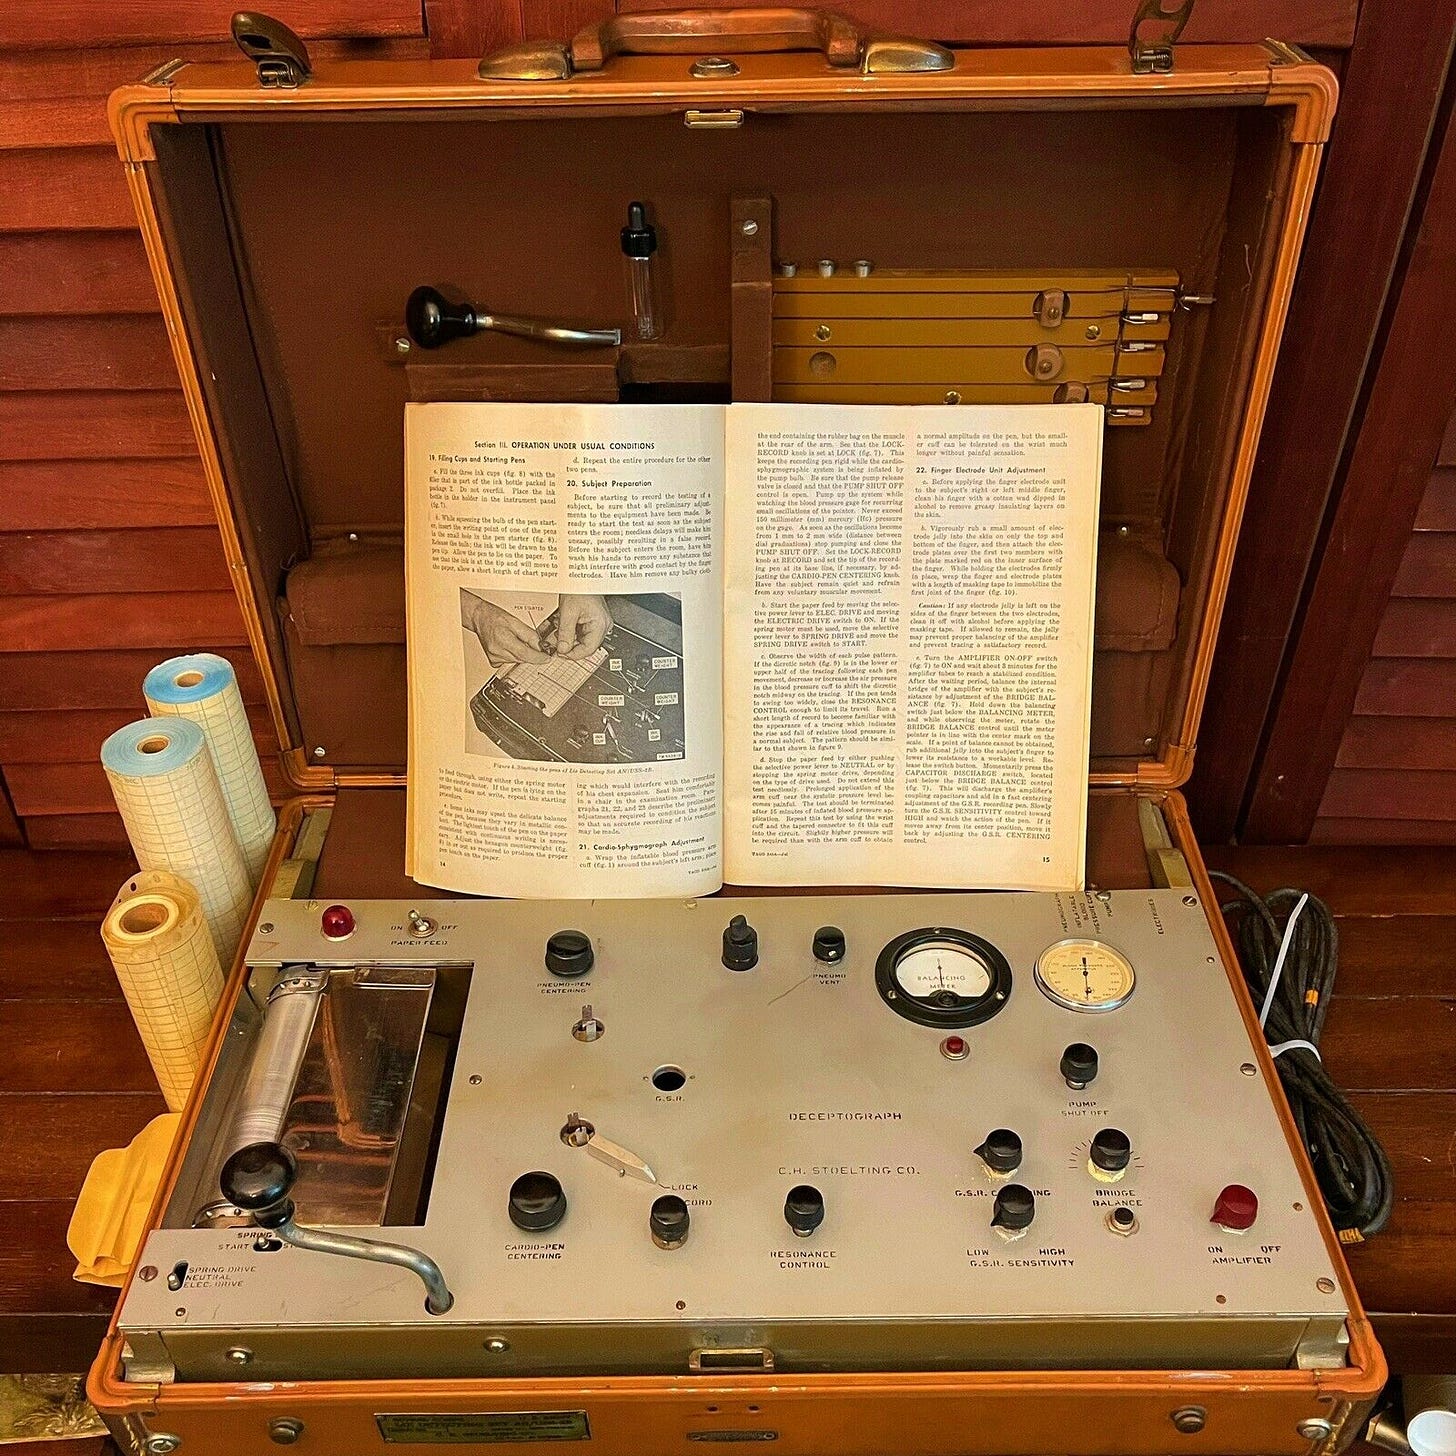 An old-time lie detector in a suitcase.